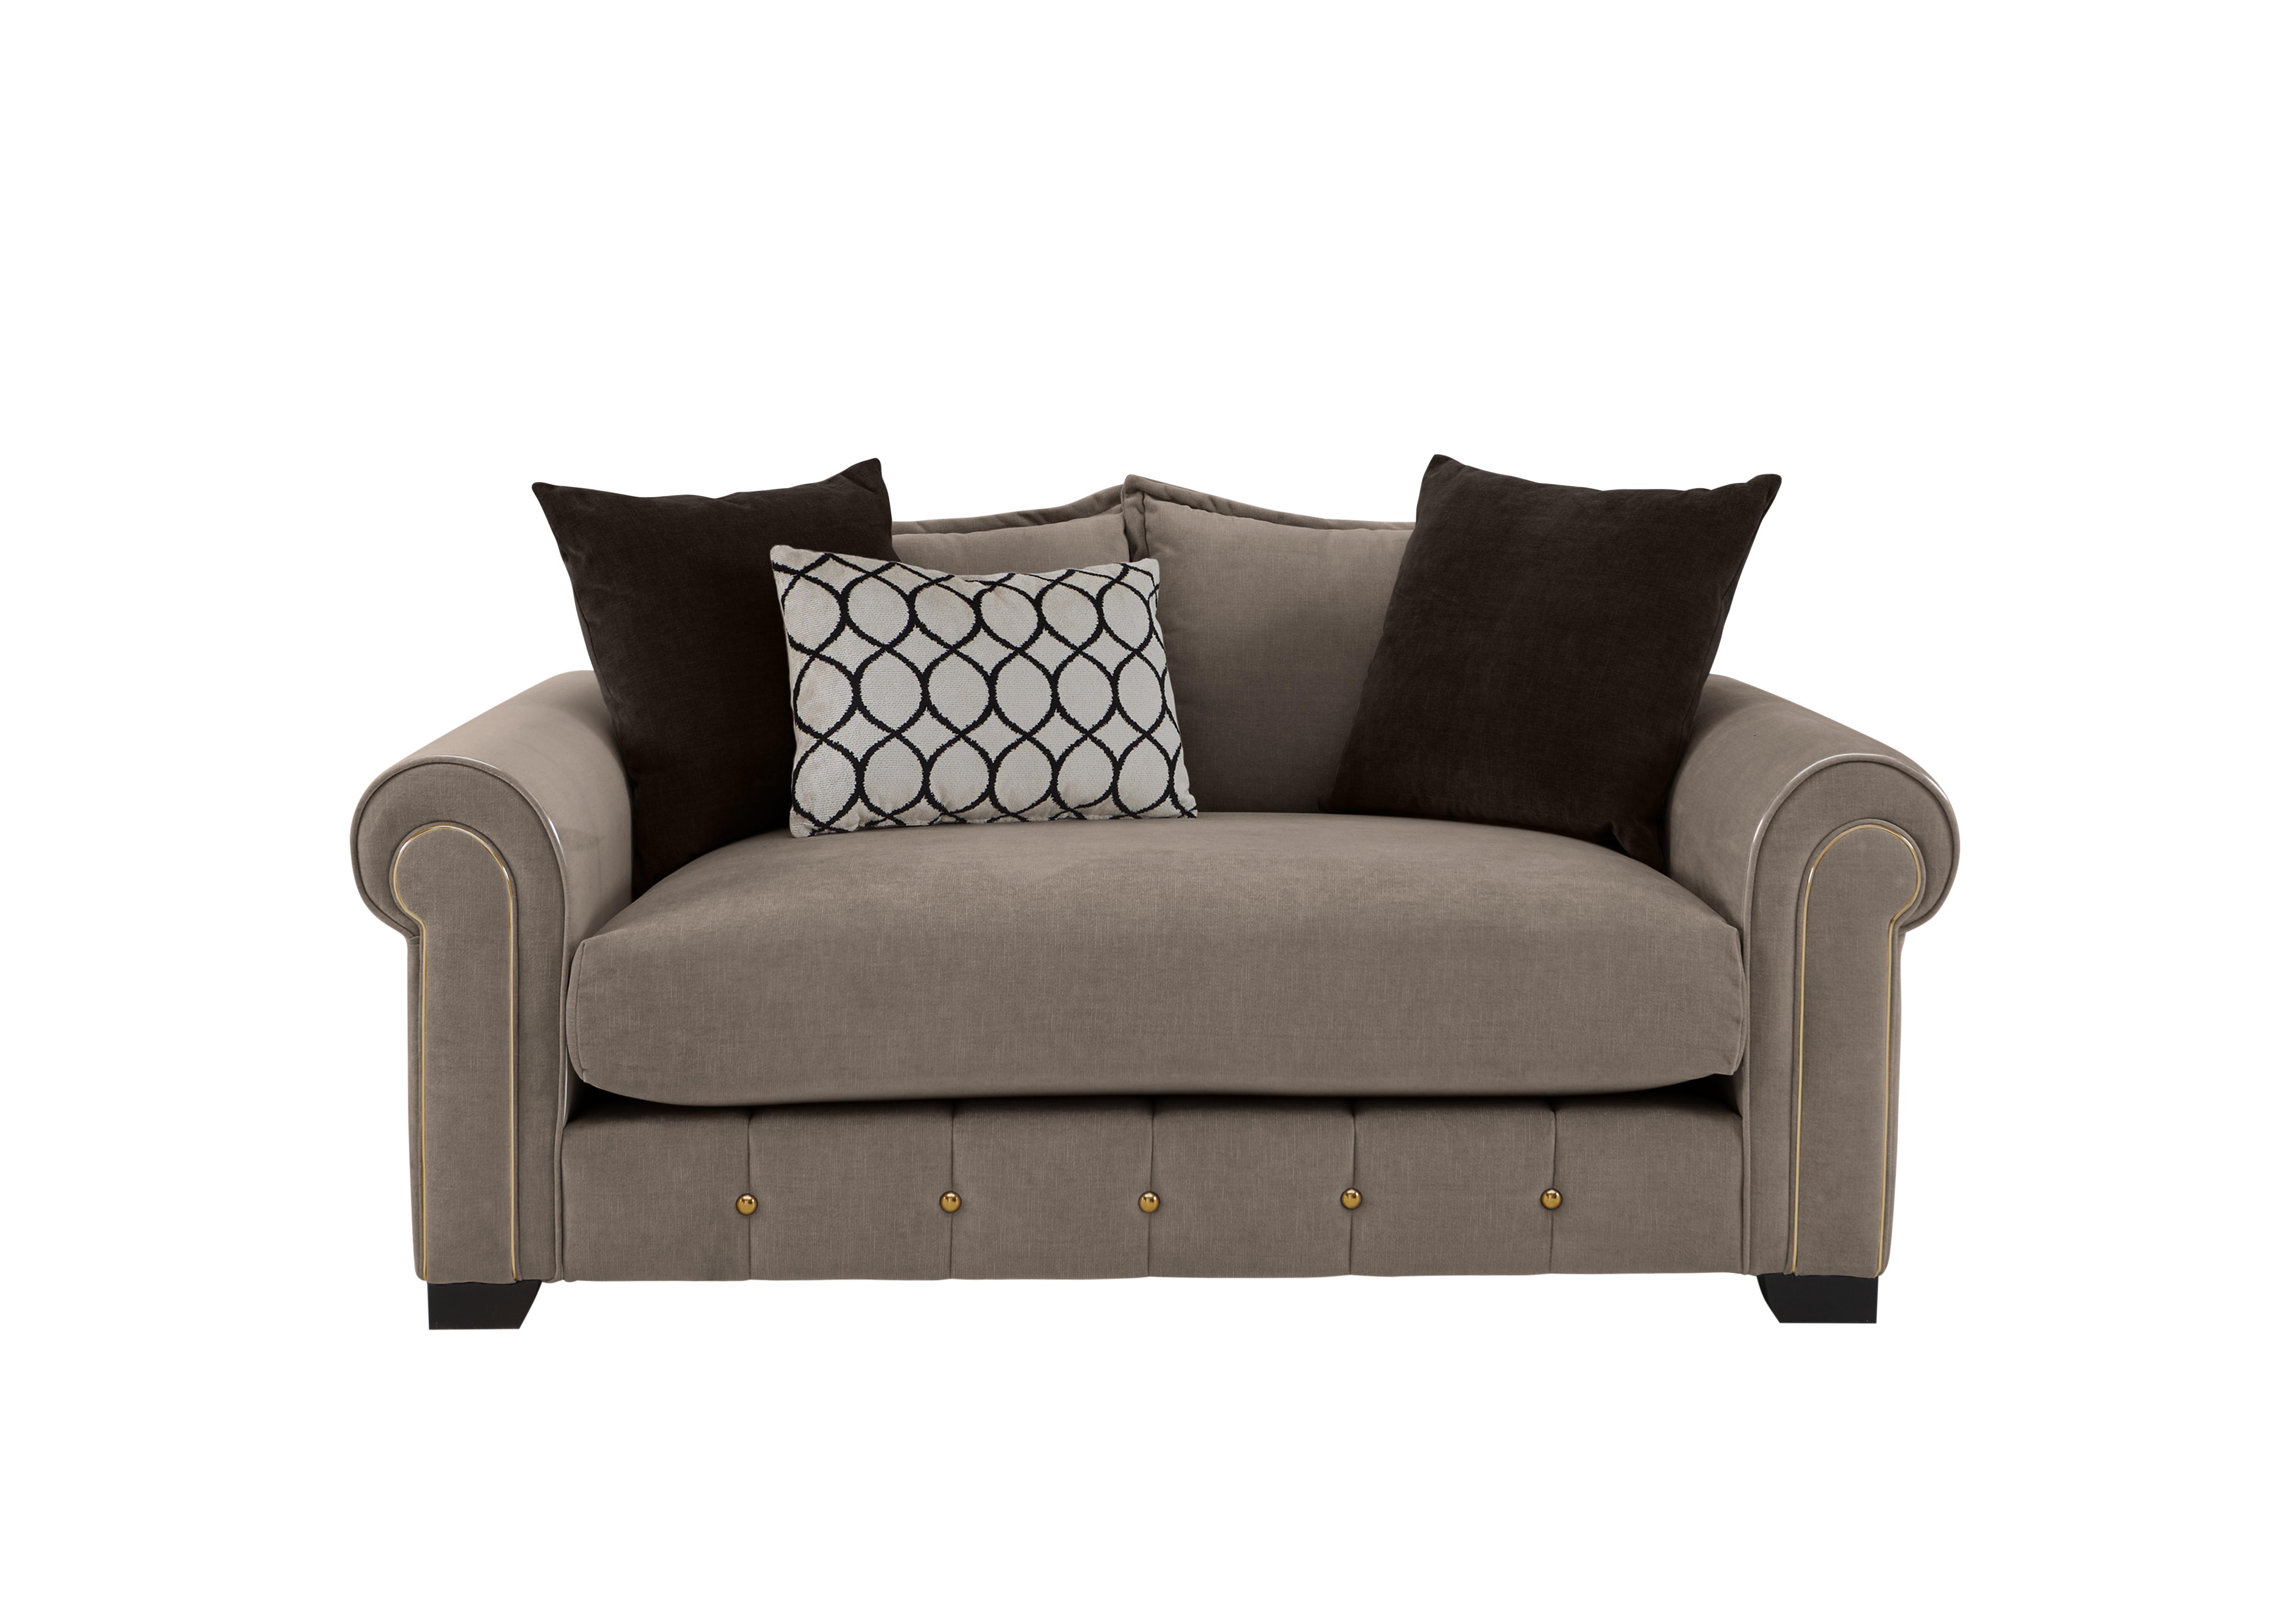 Sumptuous 2 Seater Fabric Sofa in Chamonix Wicker Dk/Gold on Furniture Village